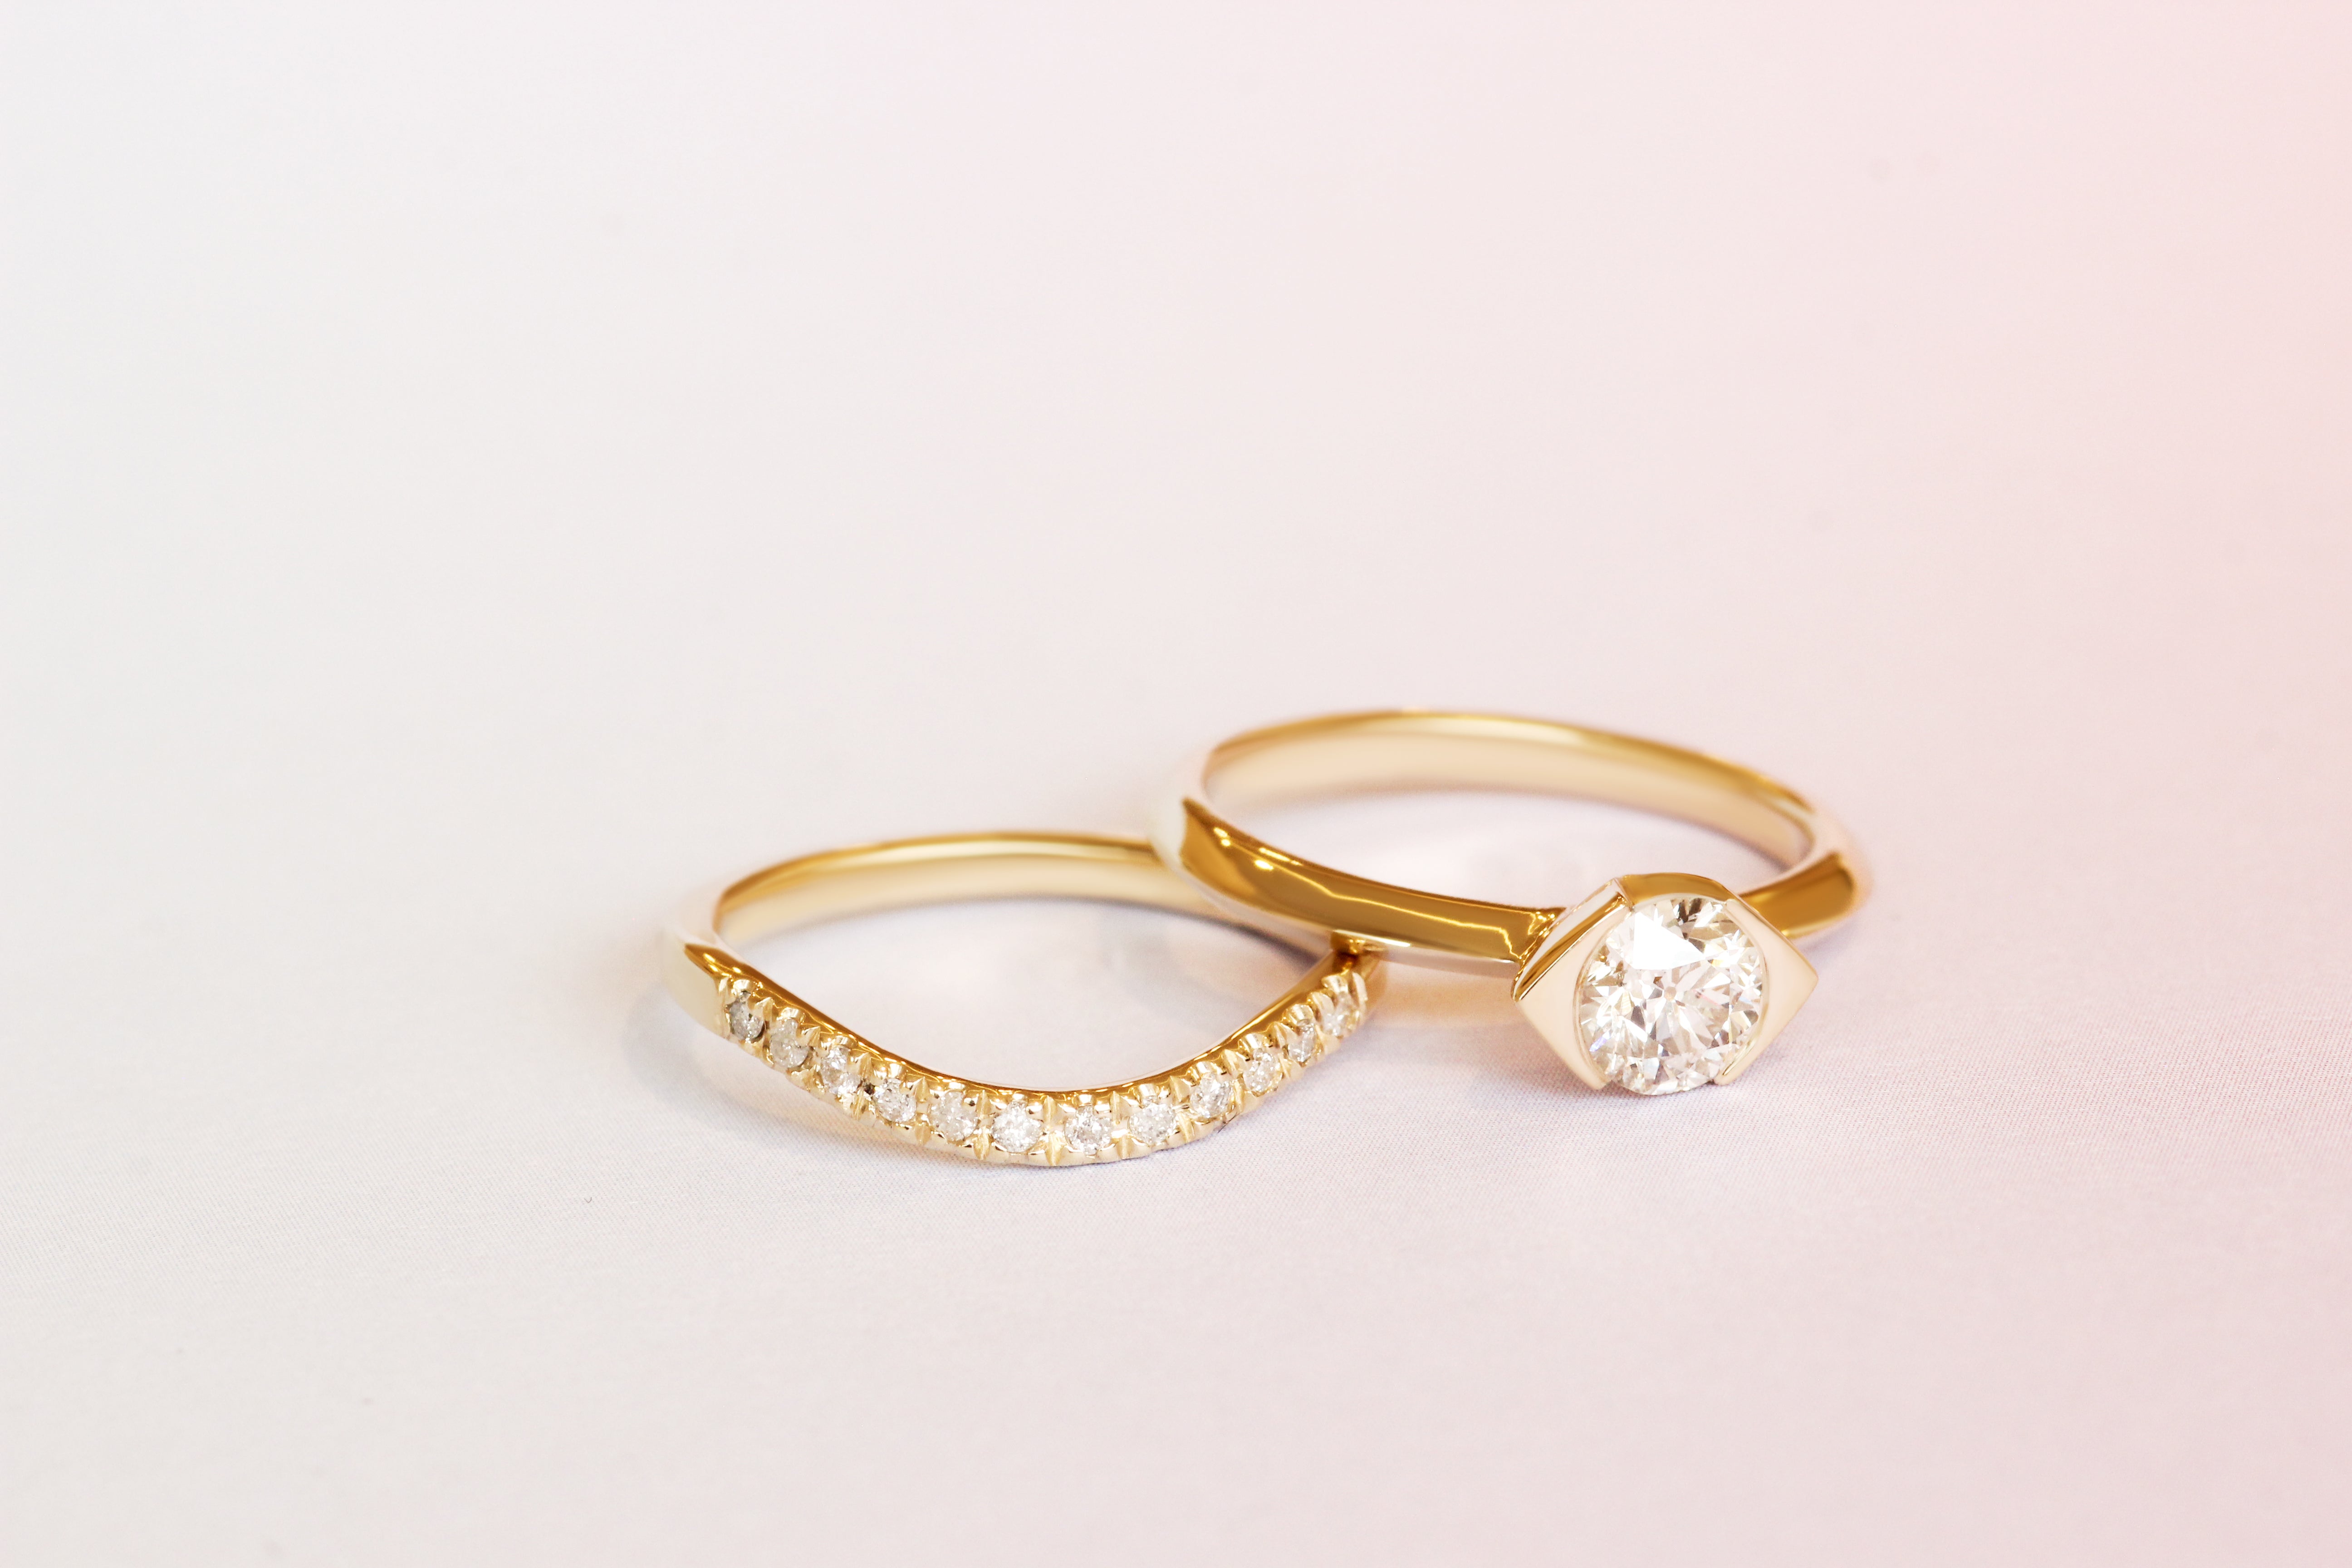 Hand view of Olivia + Raymundo's custom rings by Goldpoint Jewelry in Greenpoint, Brooklyn.